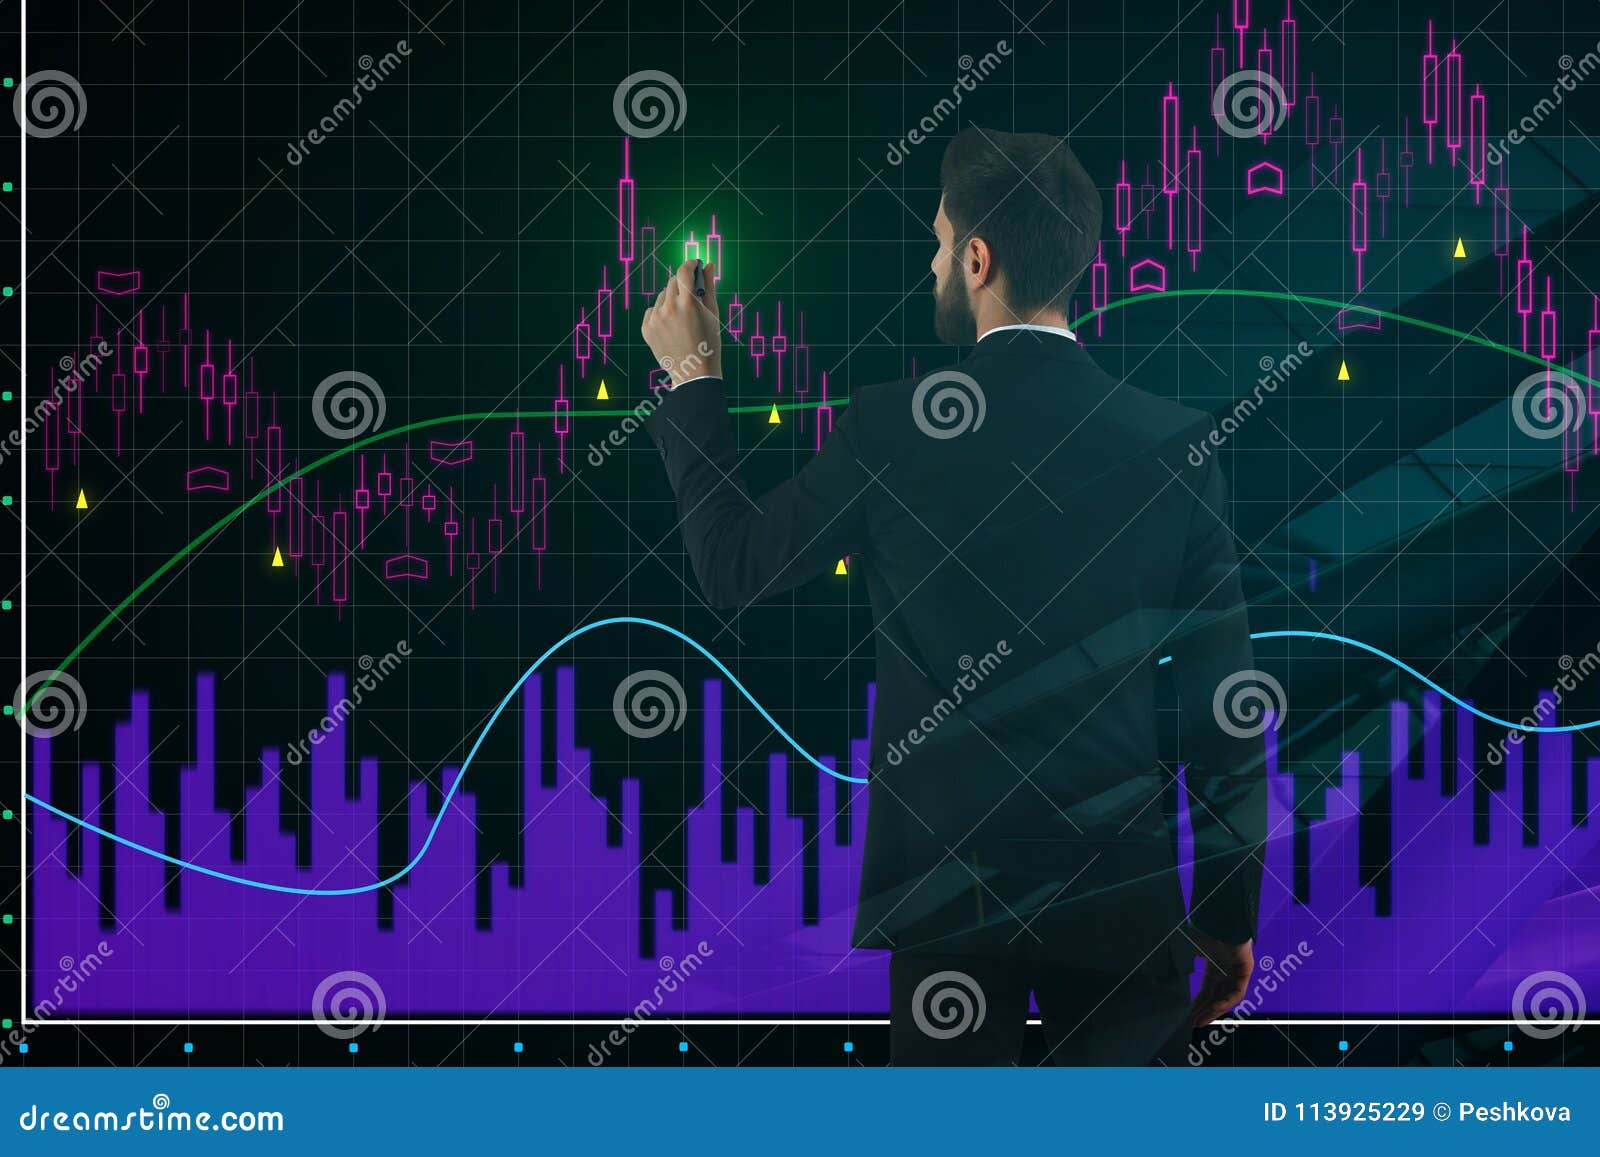 Investment Trade And Stock Concept Stock Image Image Of Future - 